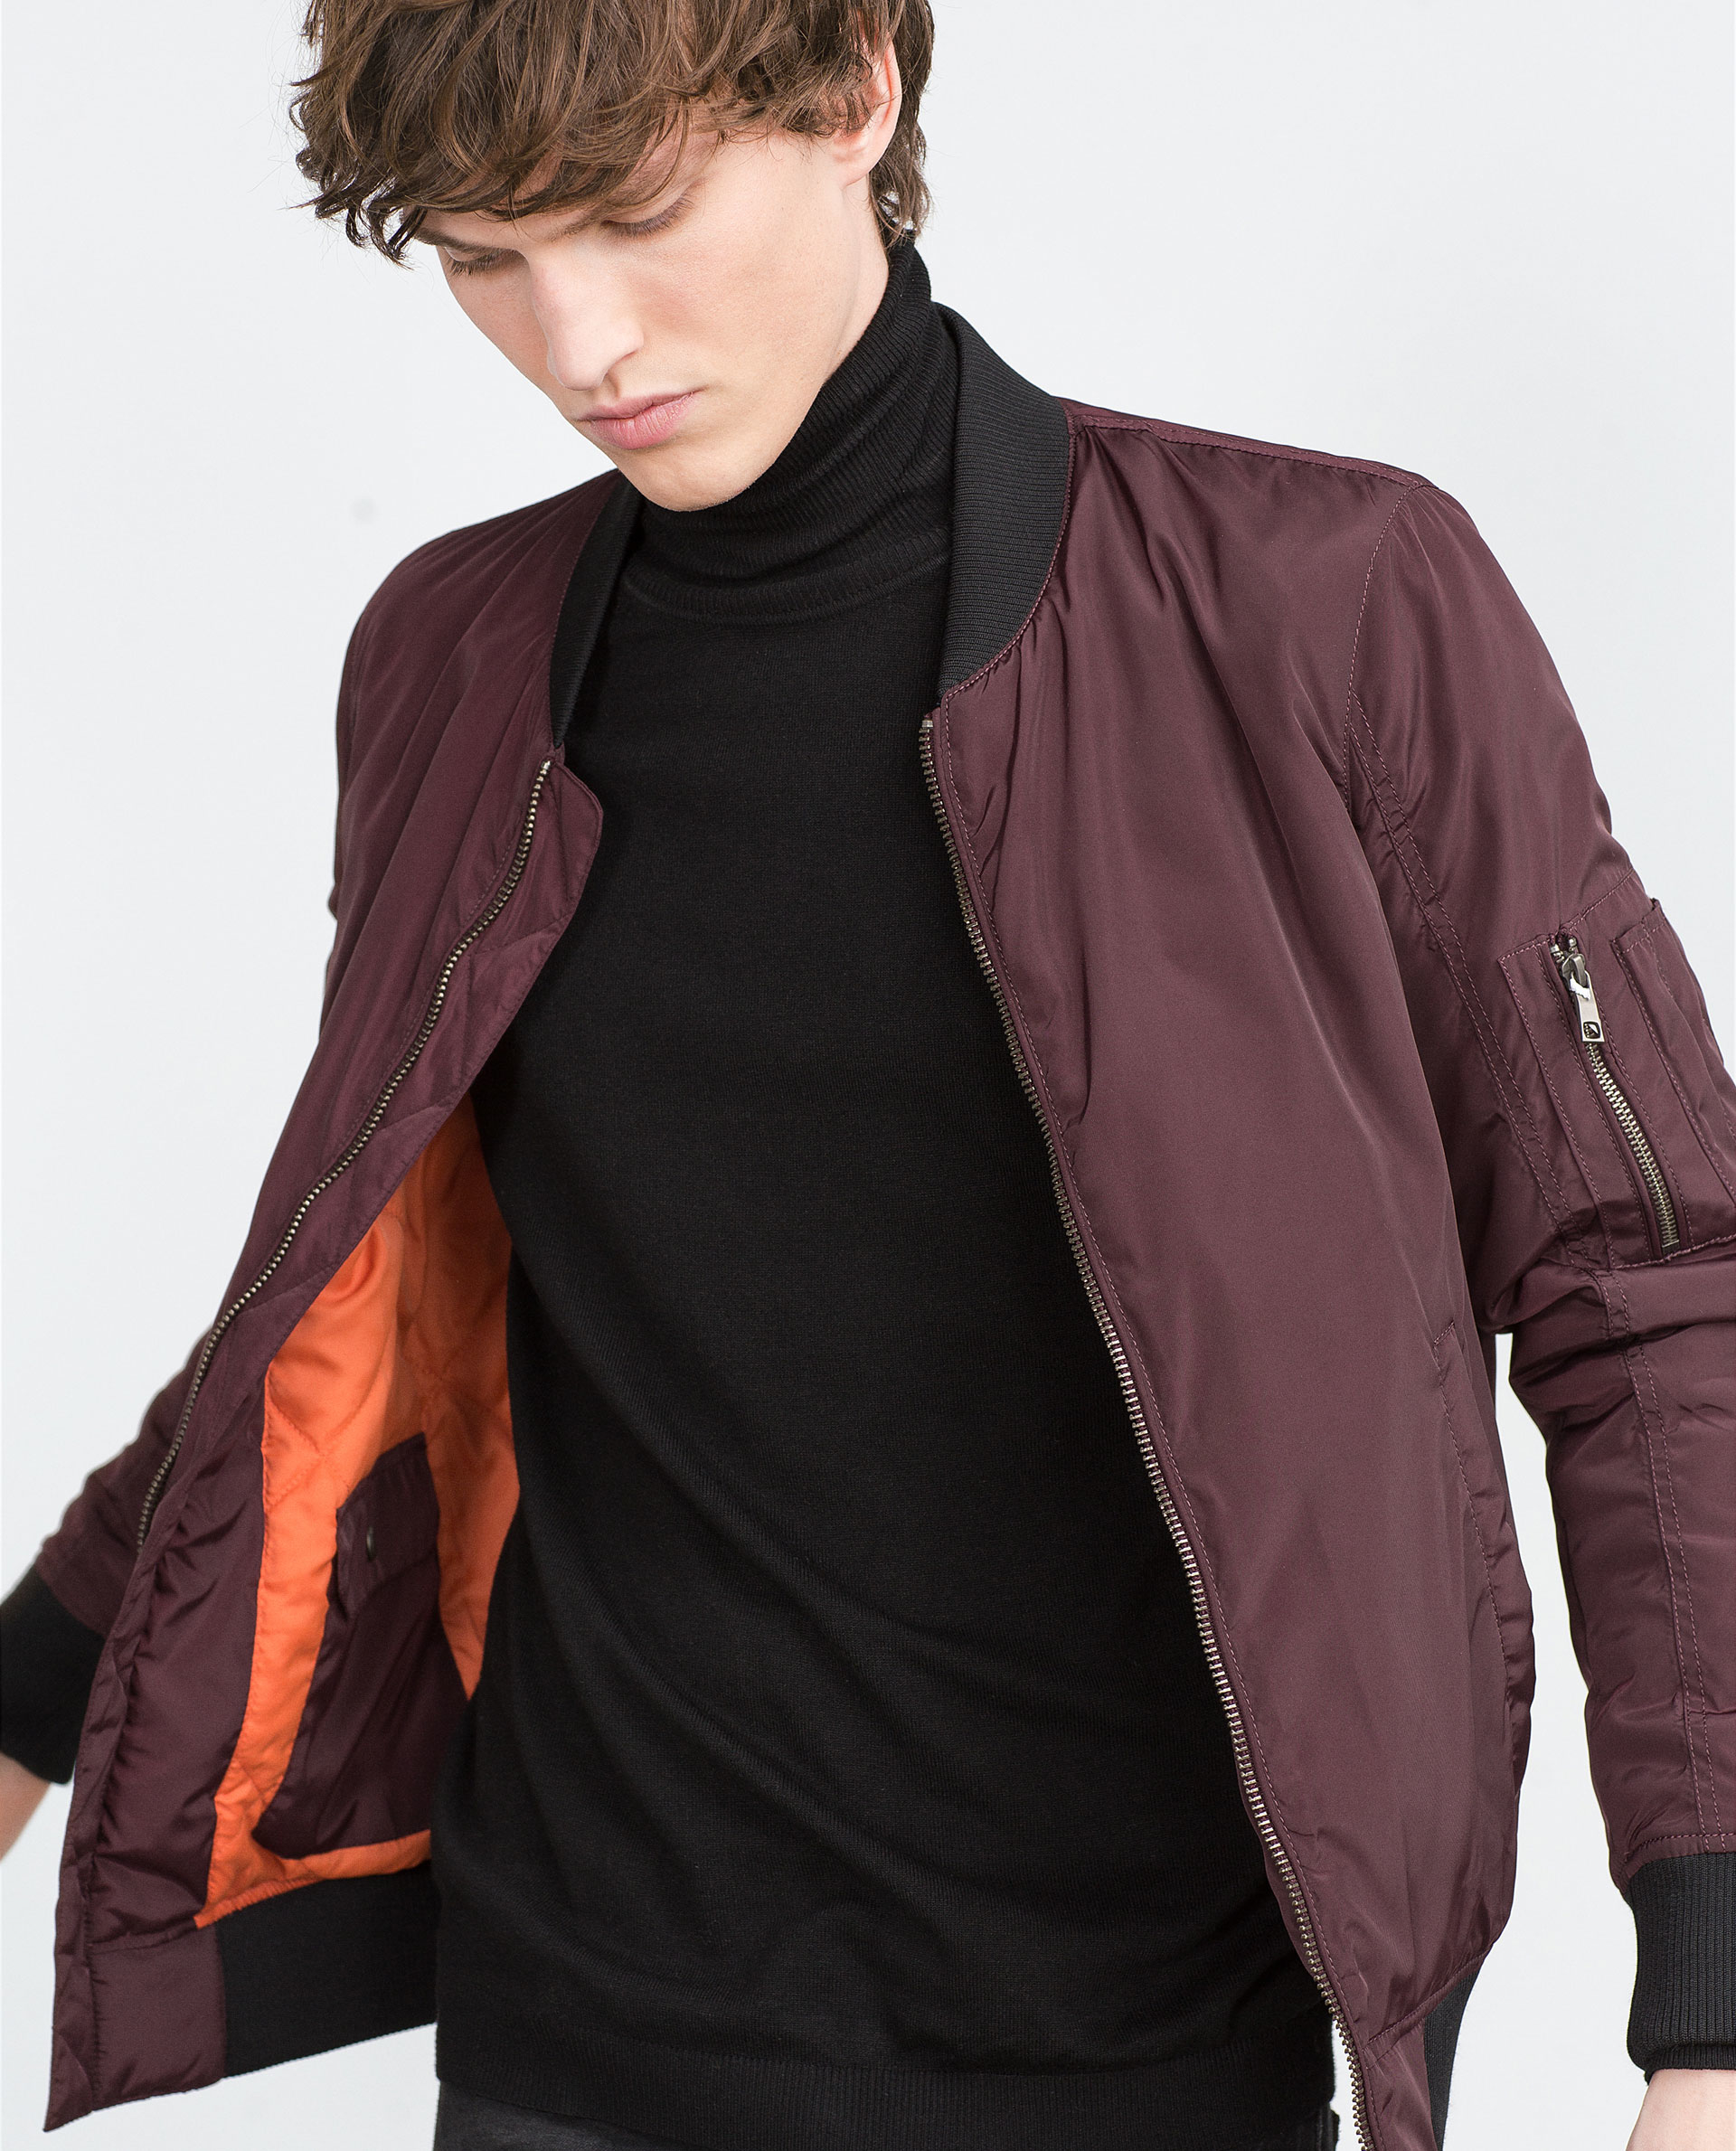 zara-maroon-bomber-jacket-with-quilted-lining-purple-product-6-744881813-normal.jpeg